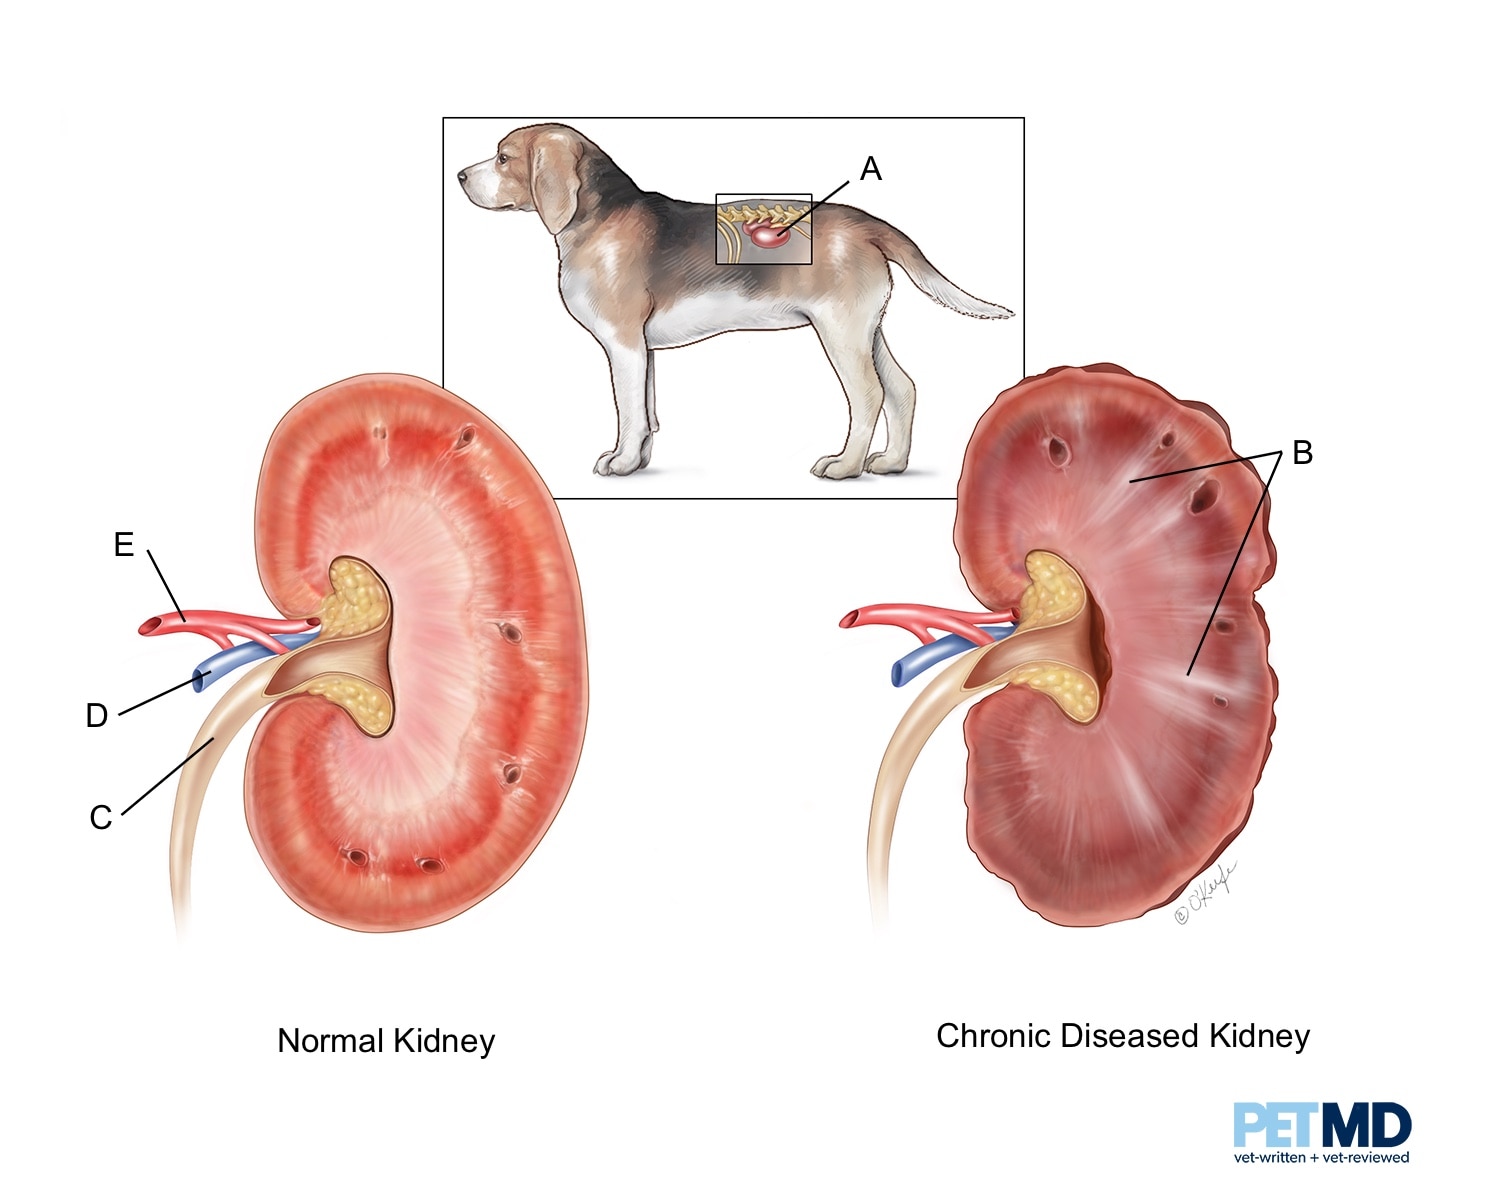 can vetmedin cause kidney failure in dogs